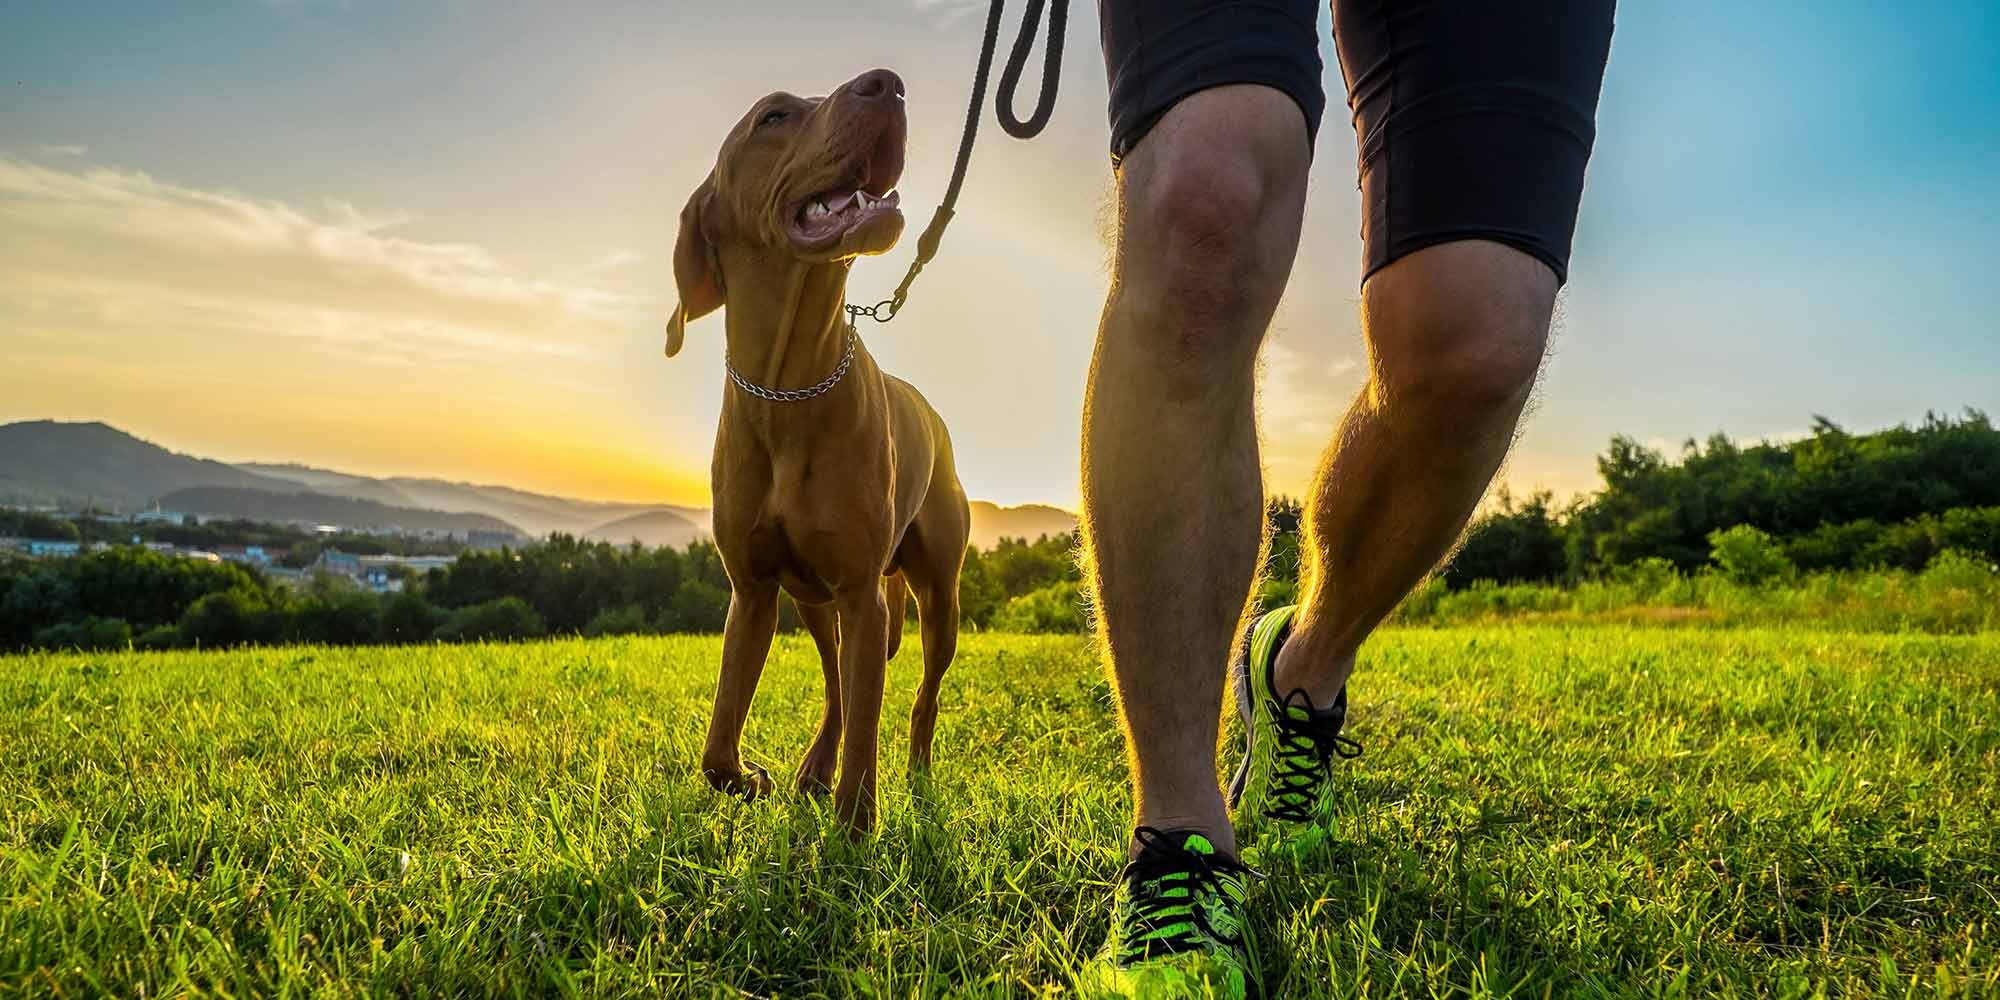 Tips for Dog Exercise